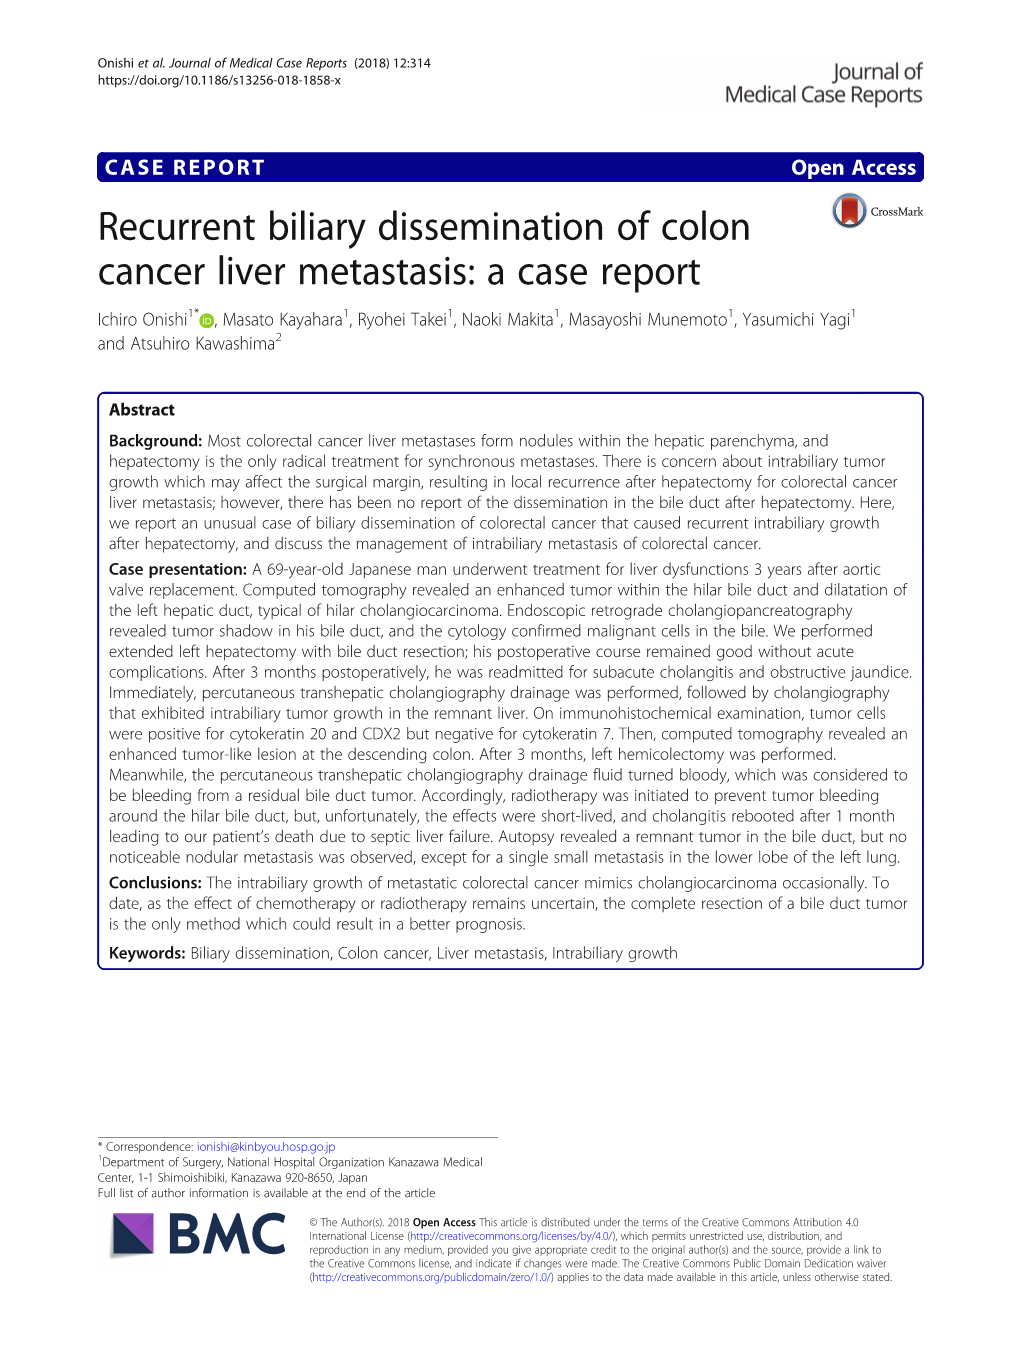 Recurrent Biliary Dissemination of Colon Cancer Liver Metastasis: A